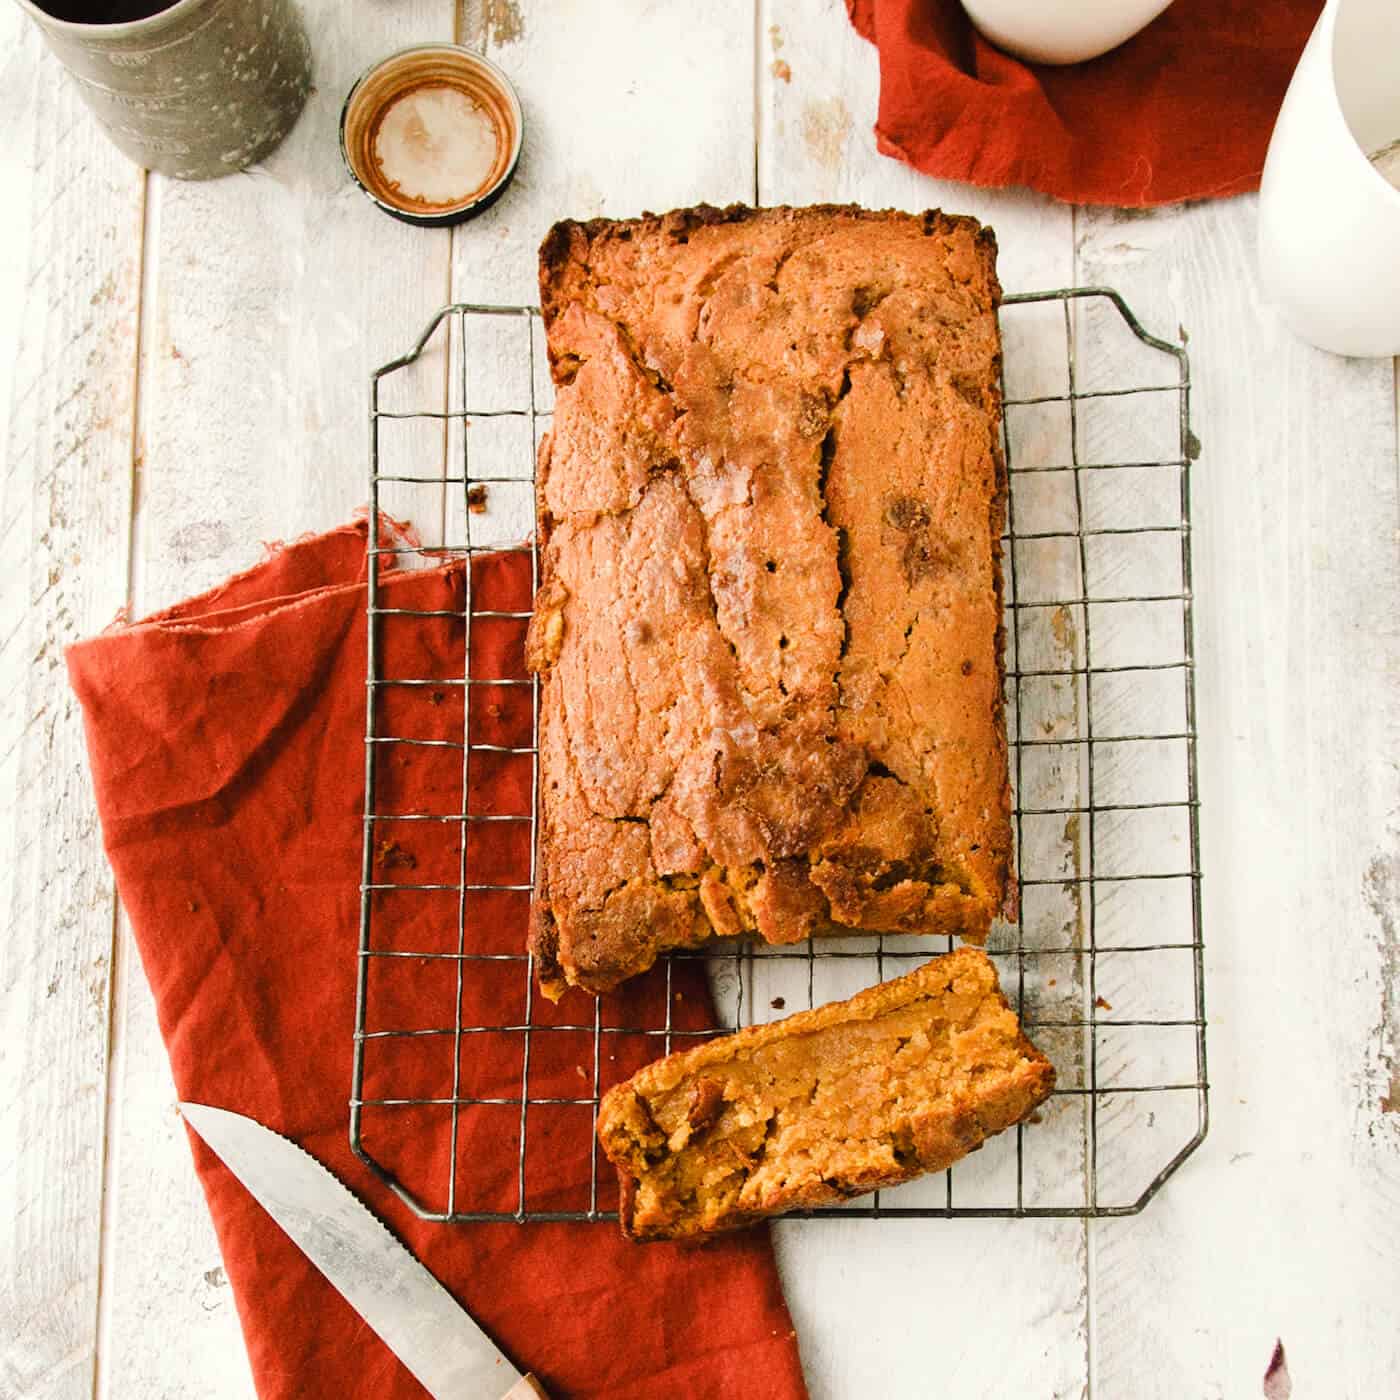 Nothing says holiday baking quite like pumpkin pie bread! This delicious, moist bread is perfect with whipped cream or cream cheese frosting.